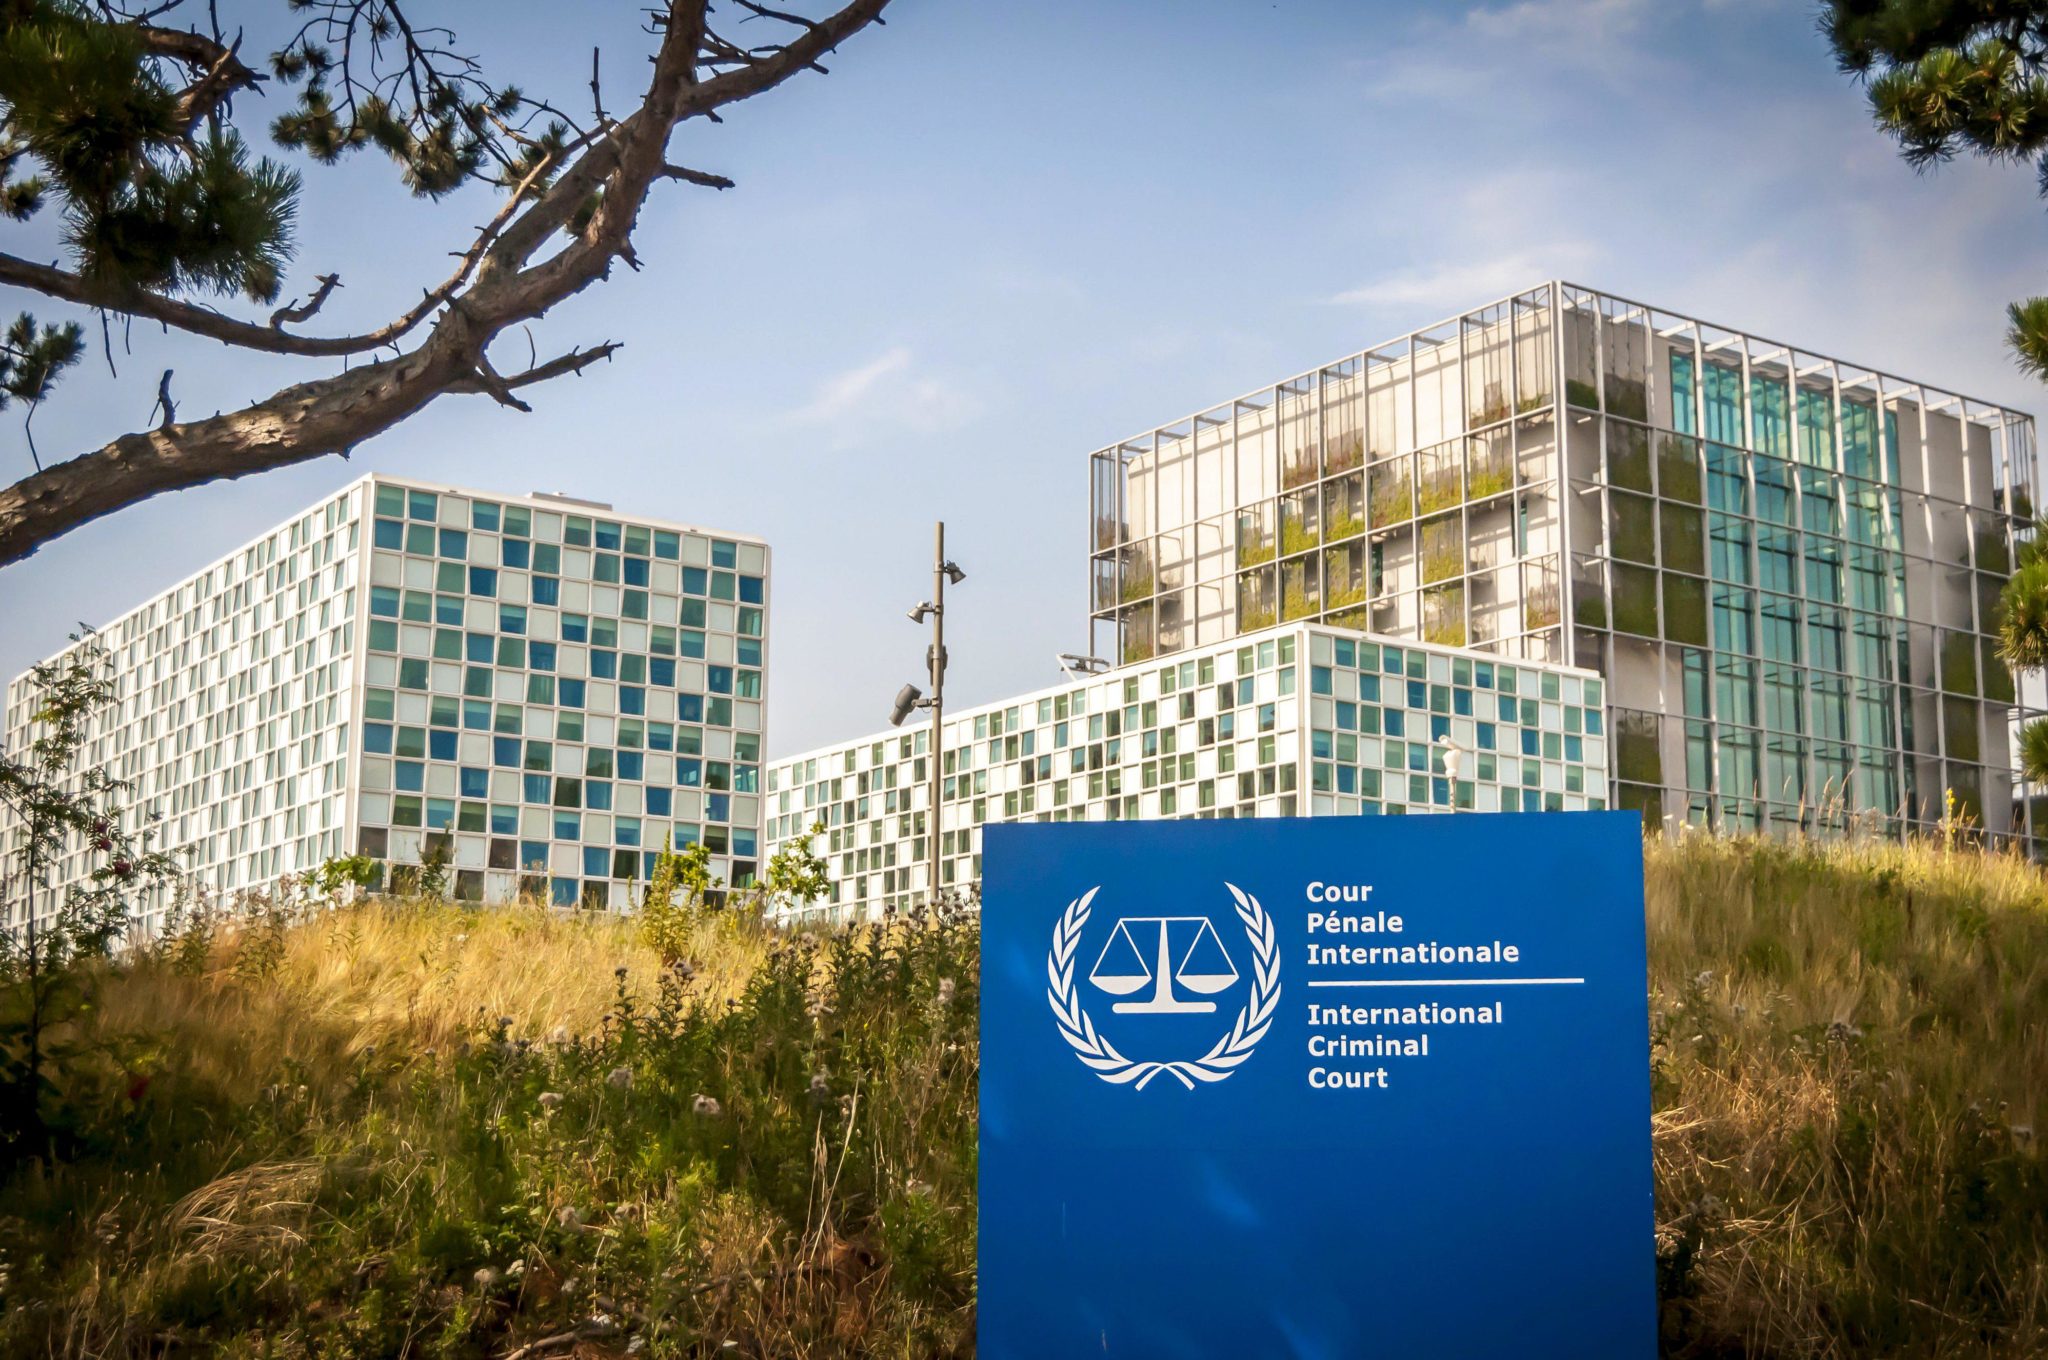 The International Criminal Court (ICC) in The Hague, Netherlands in July 2017.